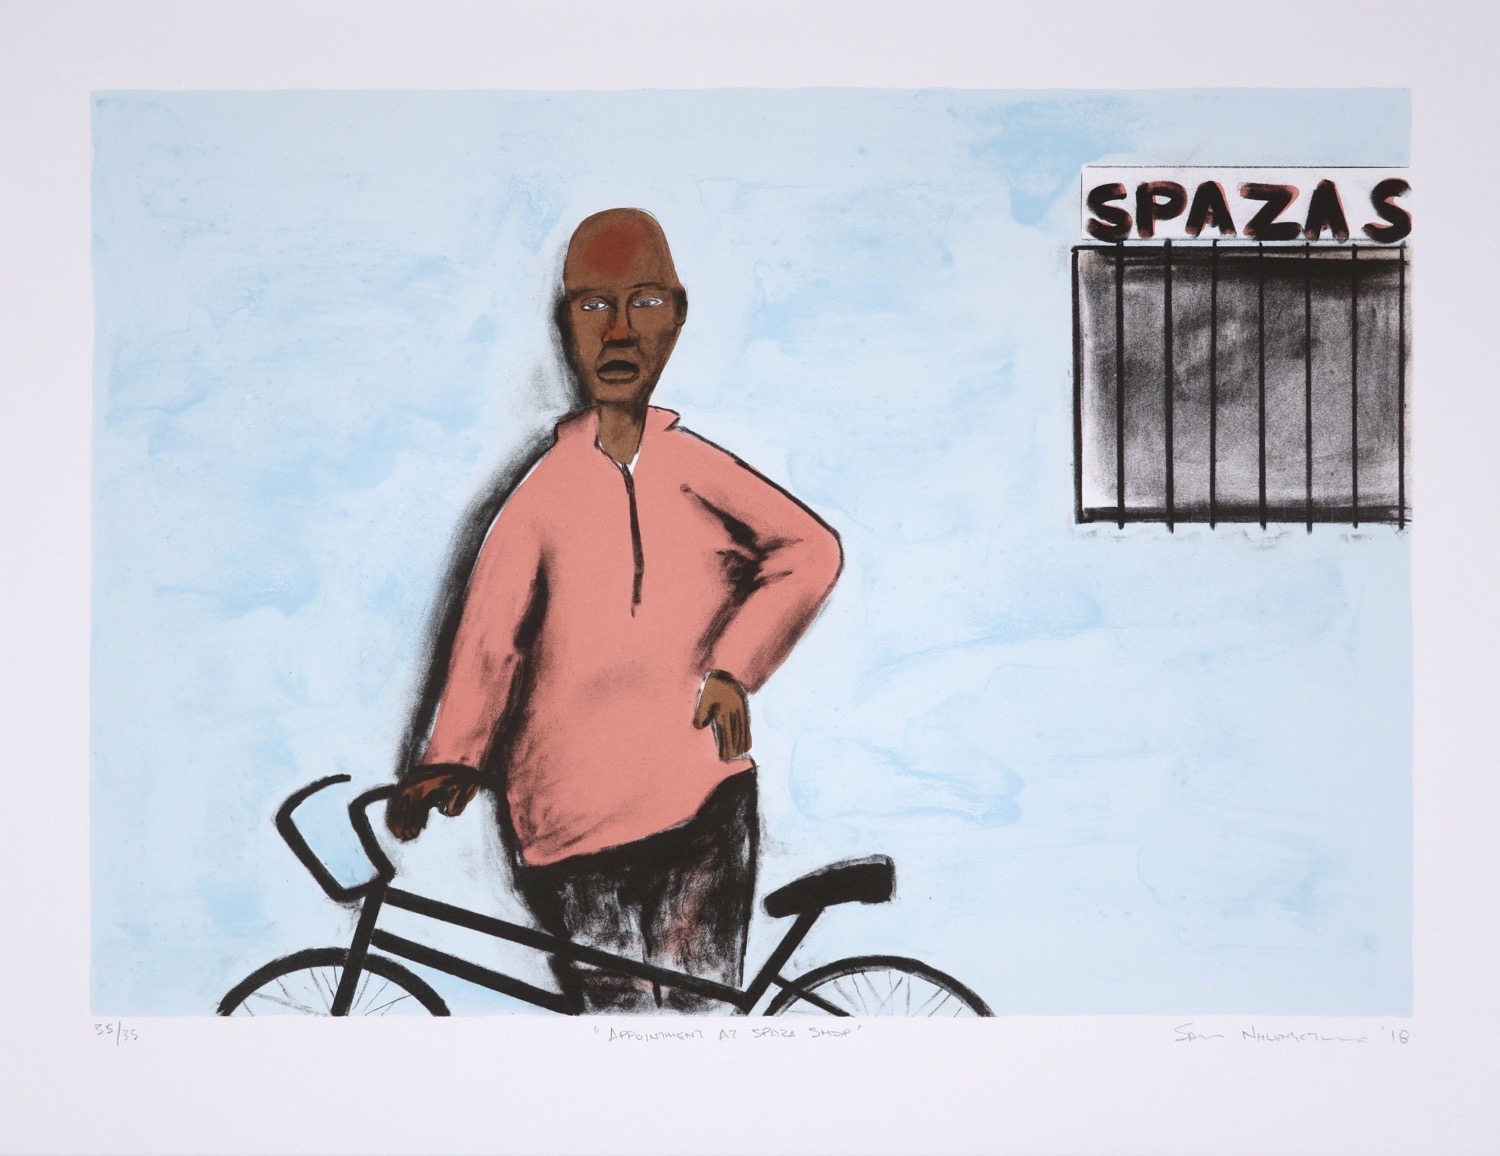 A man standing with his bicycle next to a barred spaza shop window.